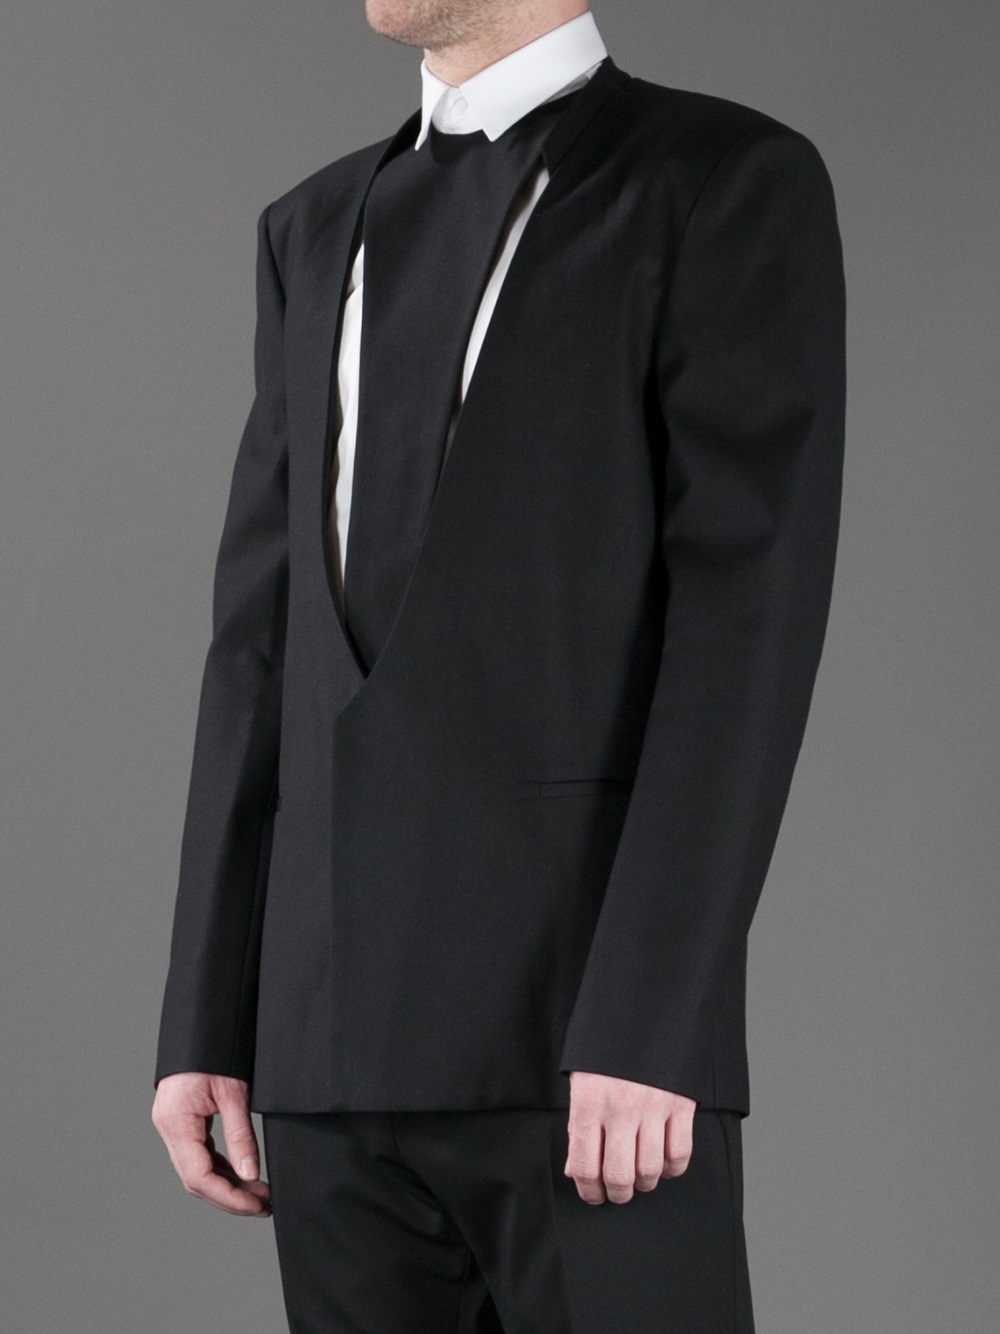 Thierry Mugler Jacket in Black for Men - Lyst